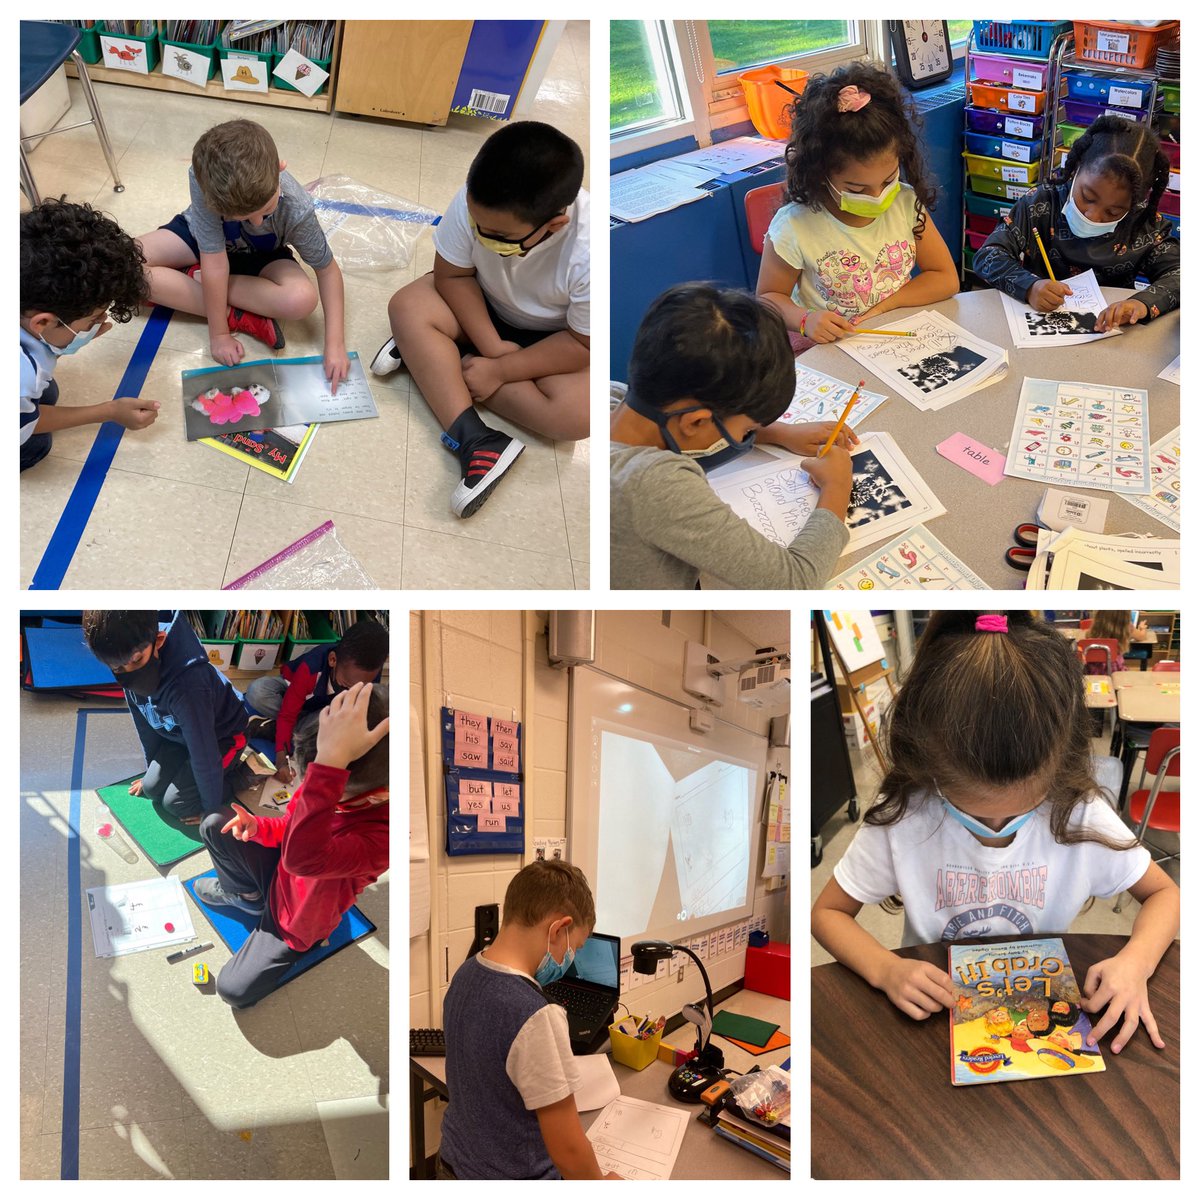 Students in Mrs. Preiss’, Mrs. Battaglia’s, & Ms. Regan’s classes are great at working together & teaching each other! This week we loved being Word Detectives 🕵️‍♂️, engaging in math, writing &small groups!#FutureTeachers #CommunityOfLearners @PreissStacey @cbatts125 @ViolaAchieves